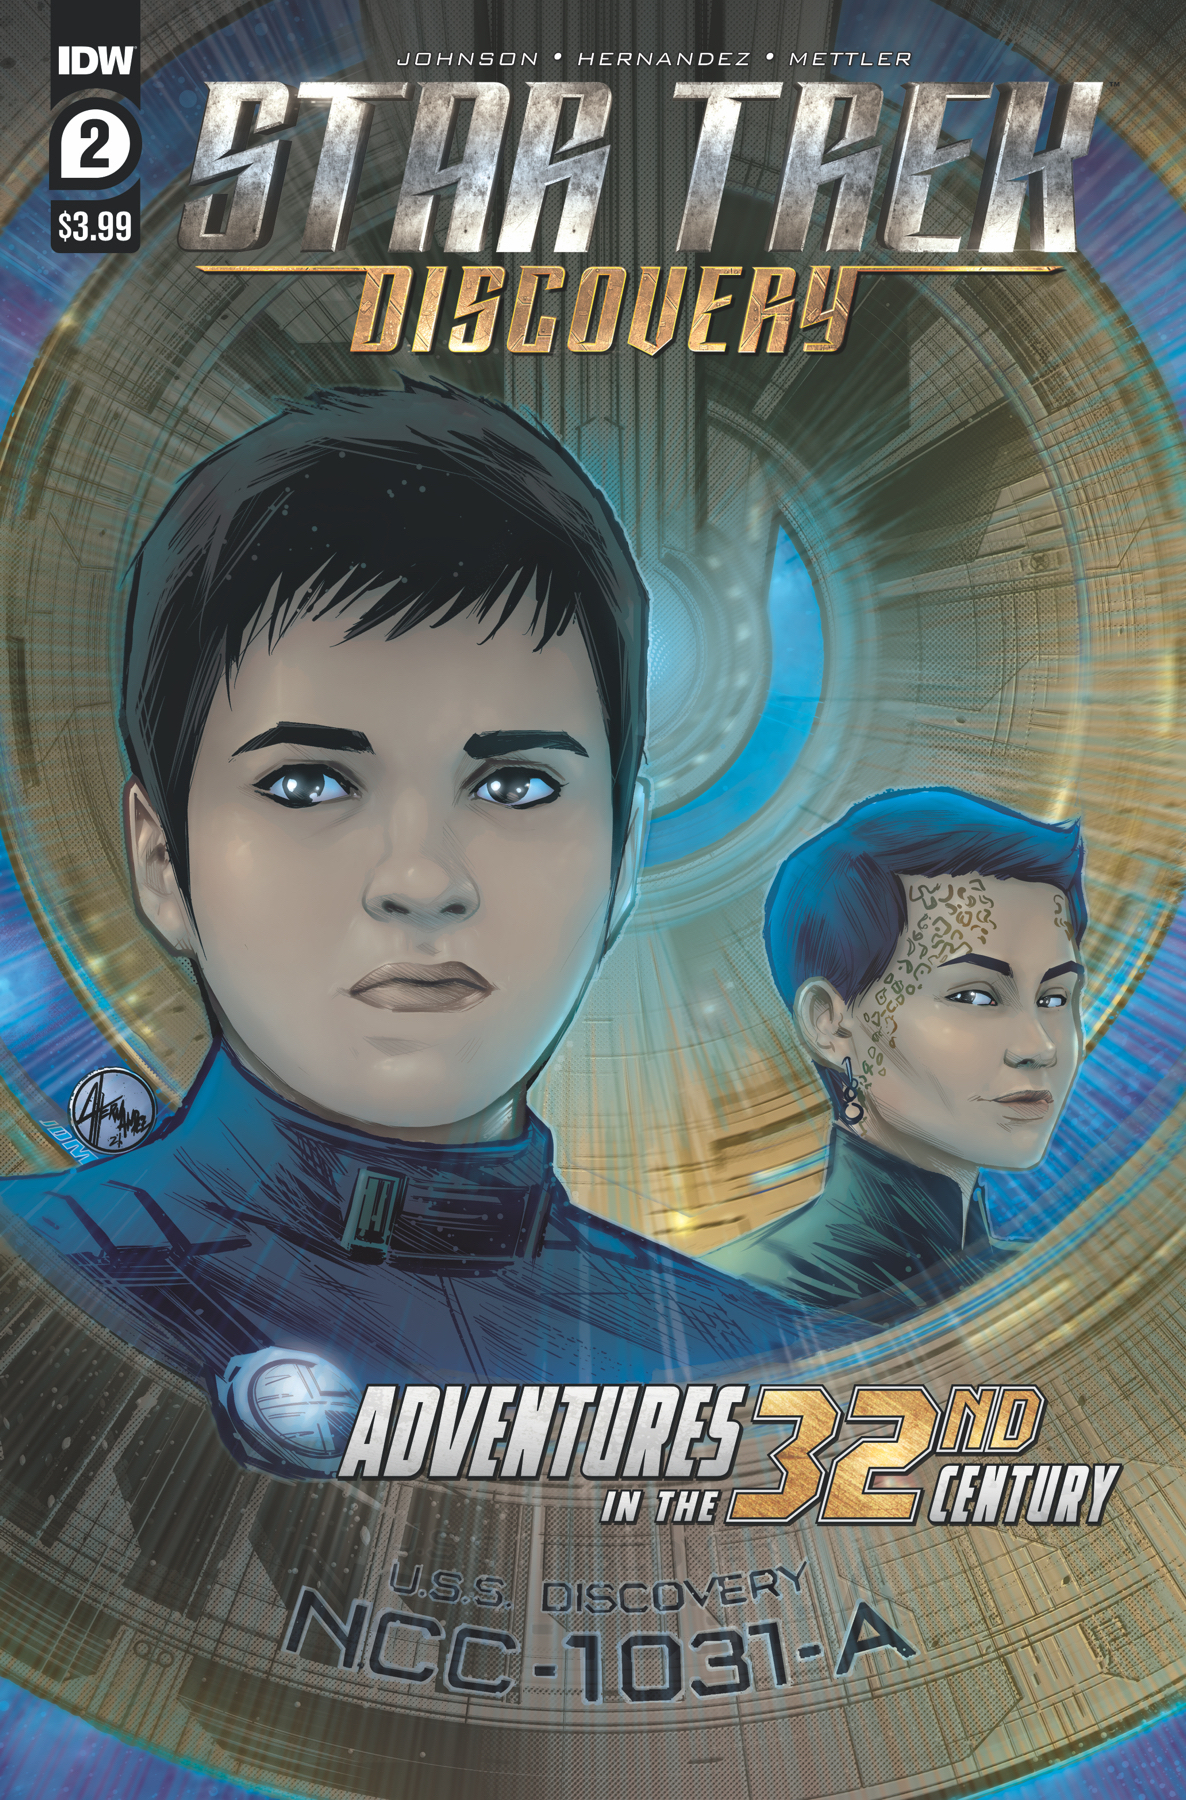 Star Trek Discovery Adventure In 32nd Century #2 Cover A Hernandez (Of 4)